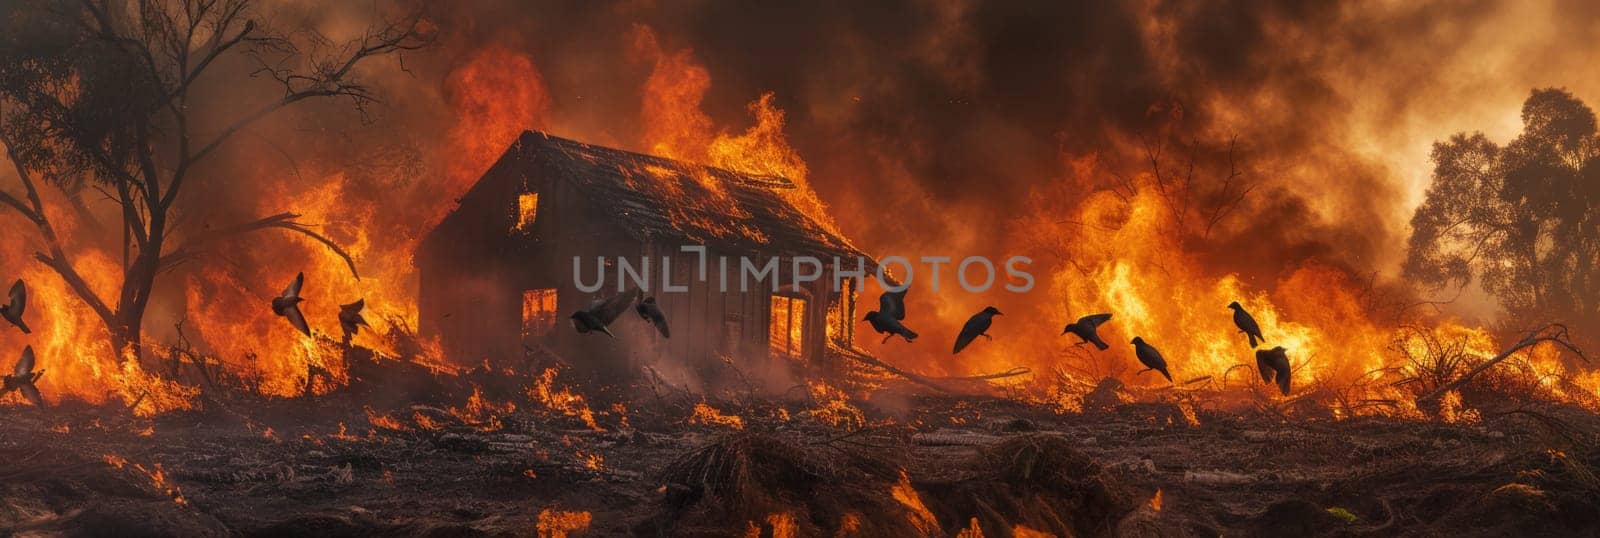 A photo capturing the intense scene of a house ablaze, surrounded by birds soaring in the air.